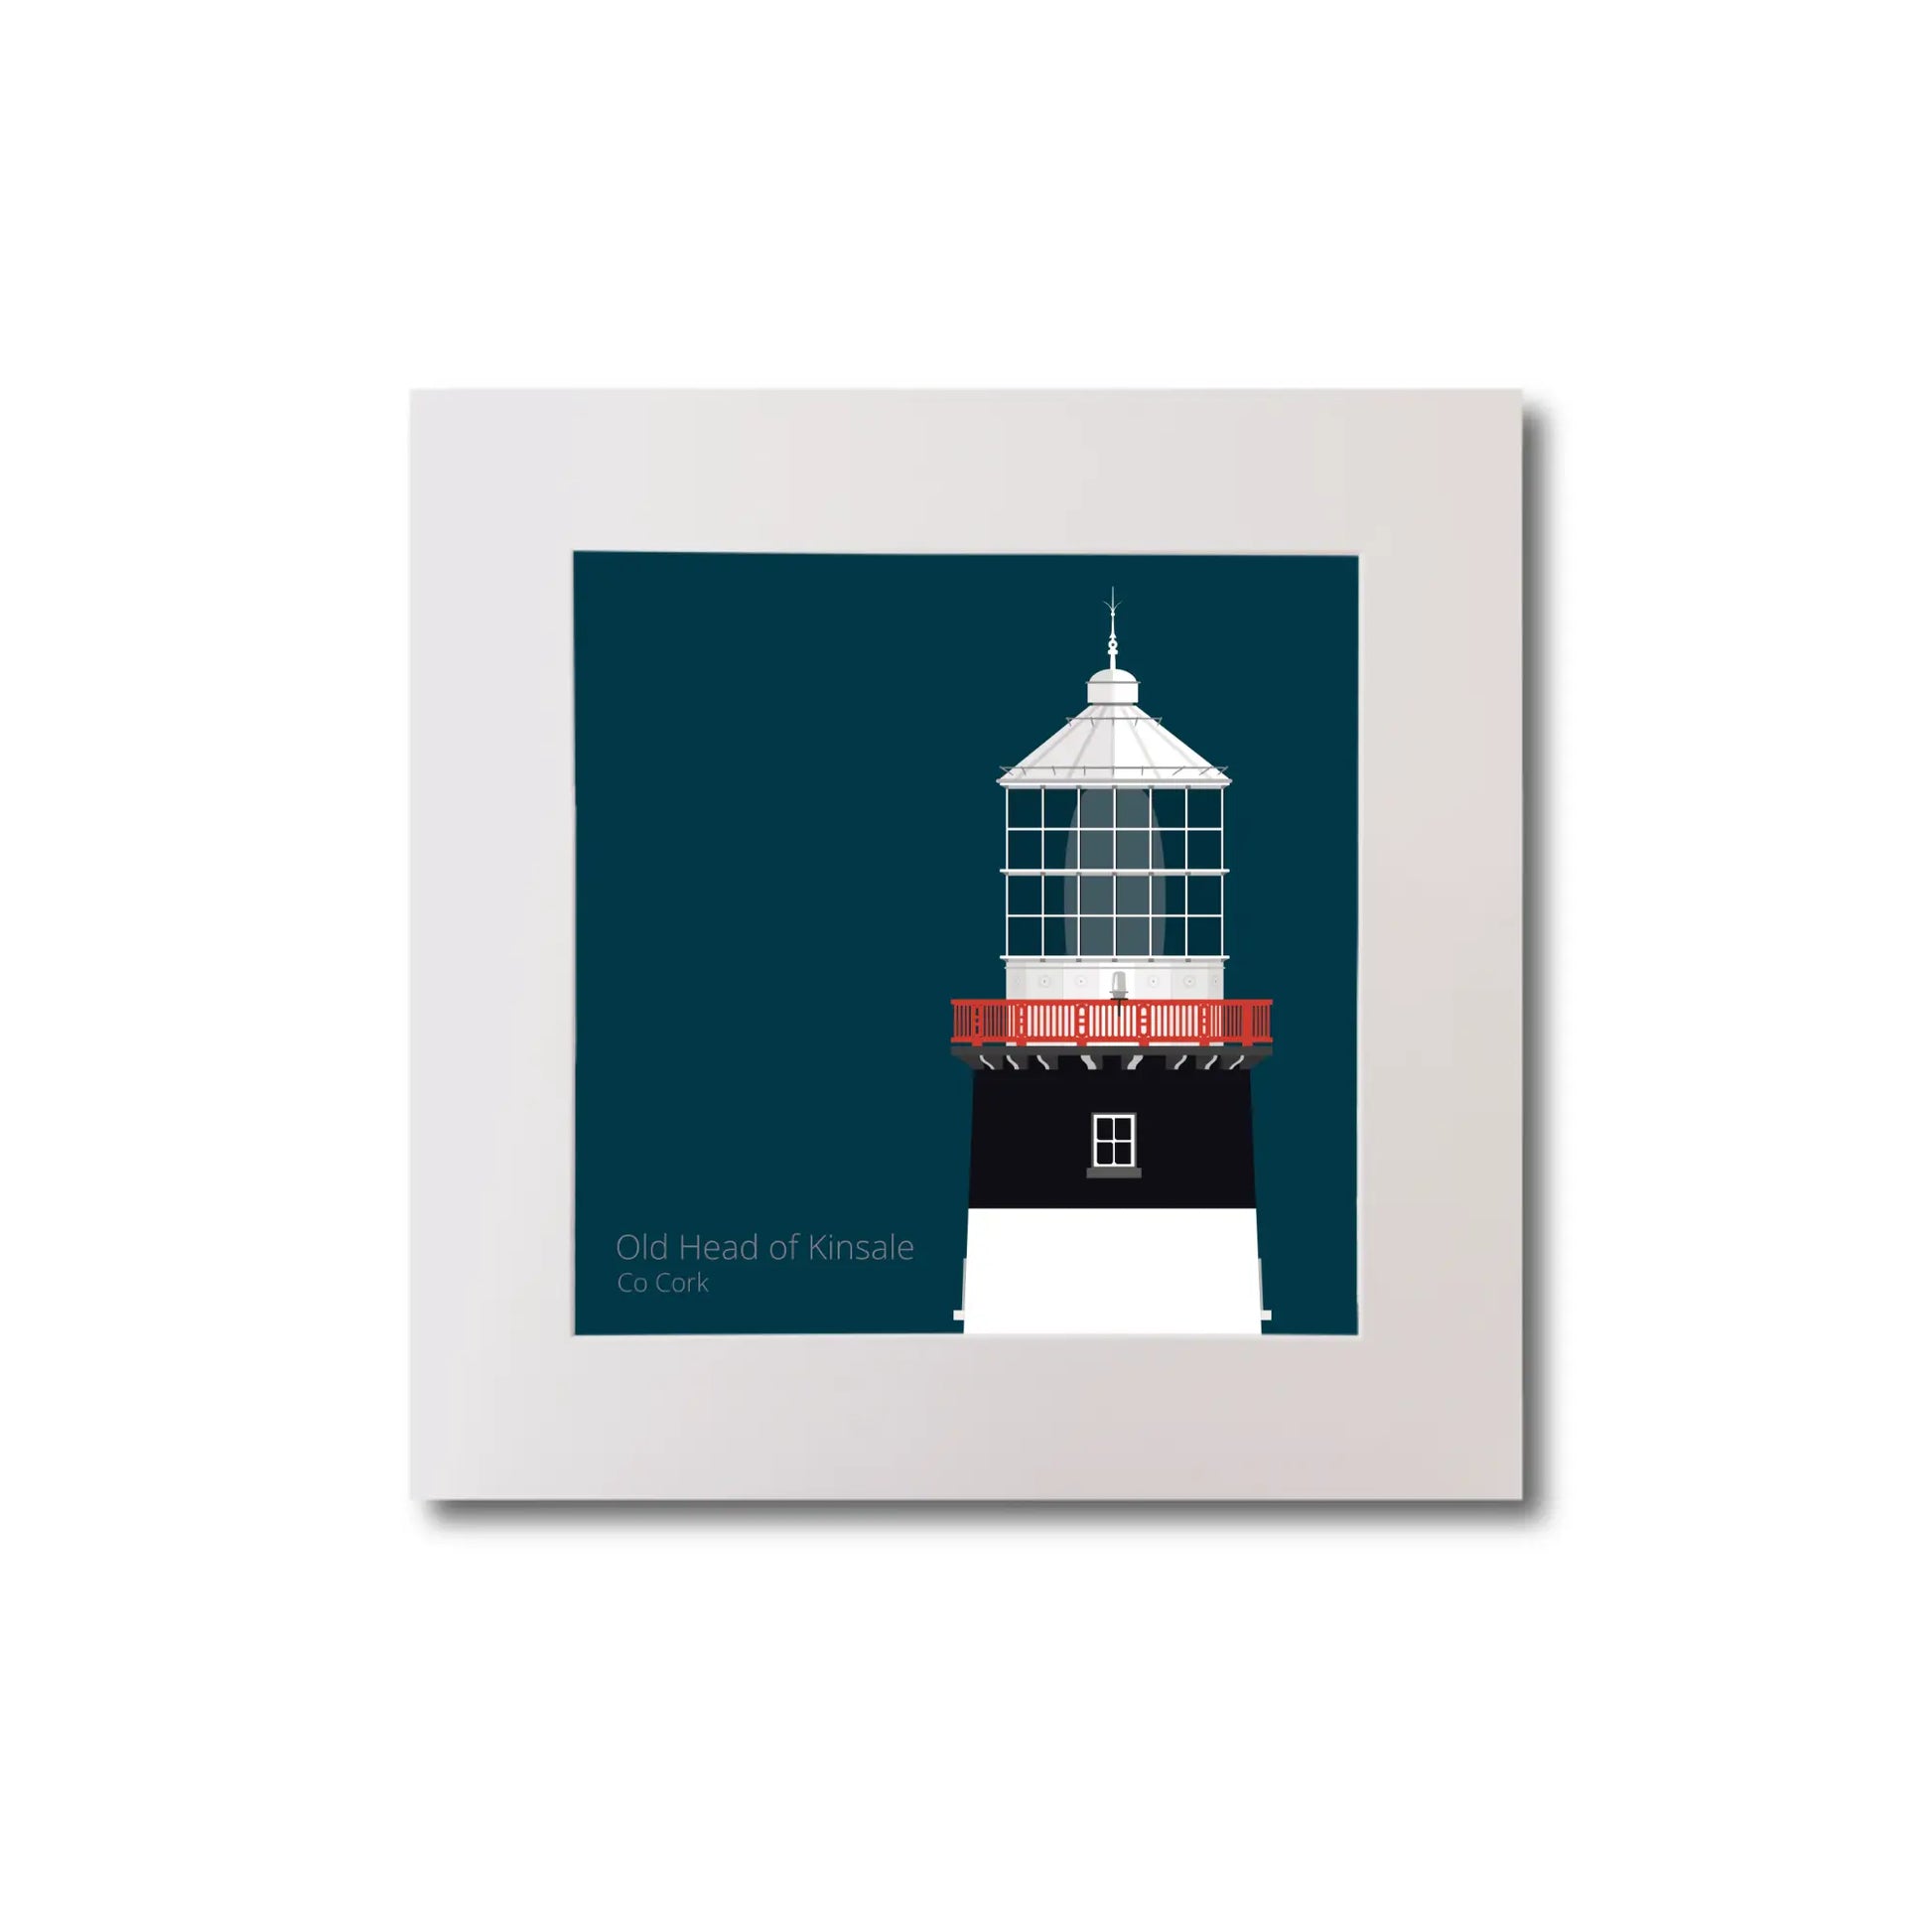 Illustration of Old Head of Kinsale lighthouse on a midnight blue background, mounted and measuring 20x20cm.